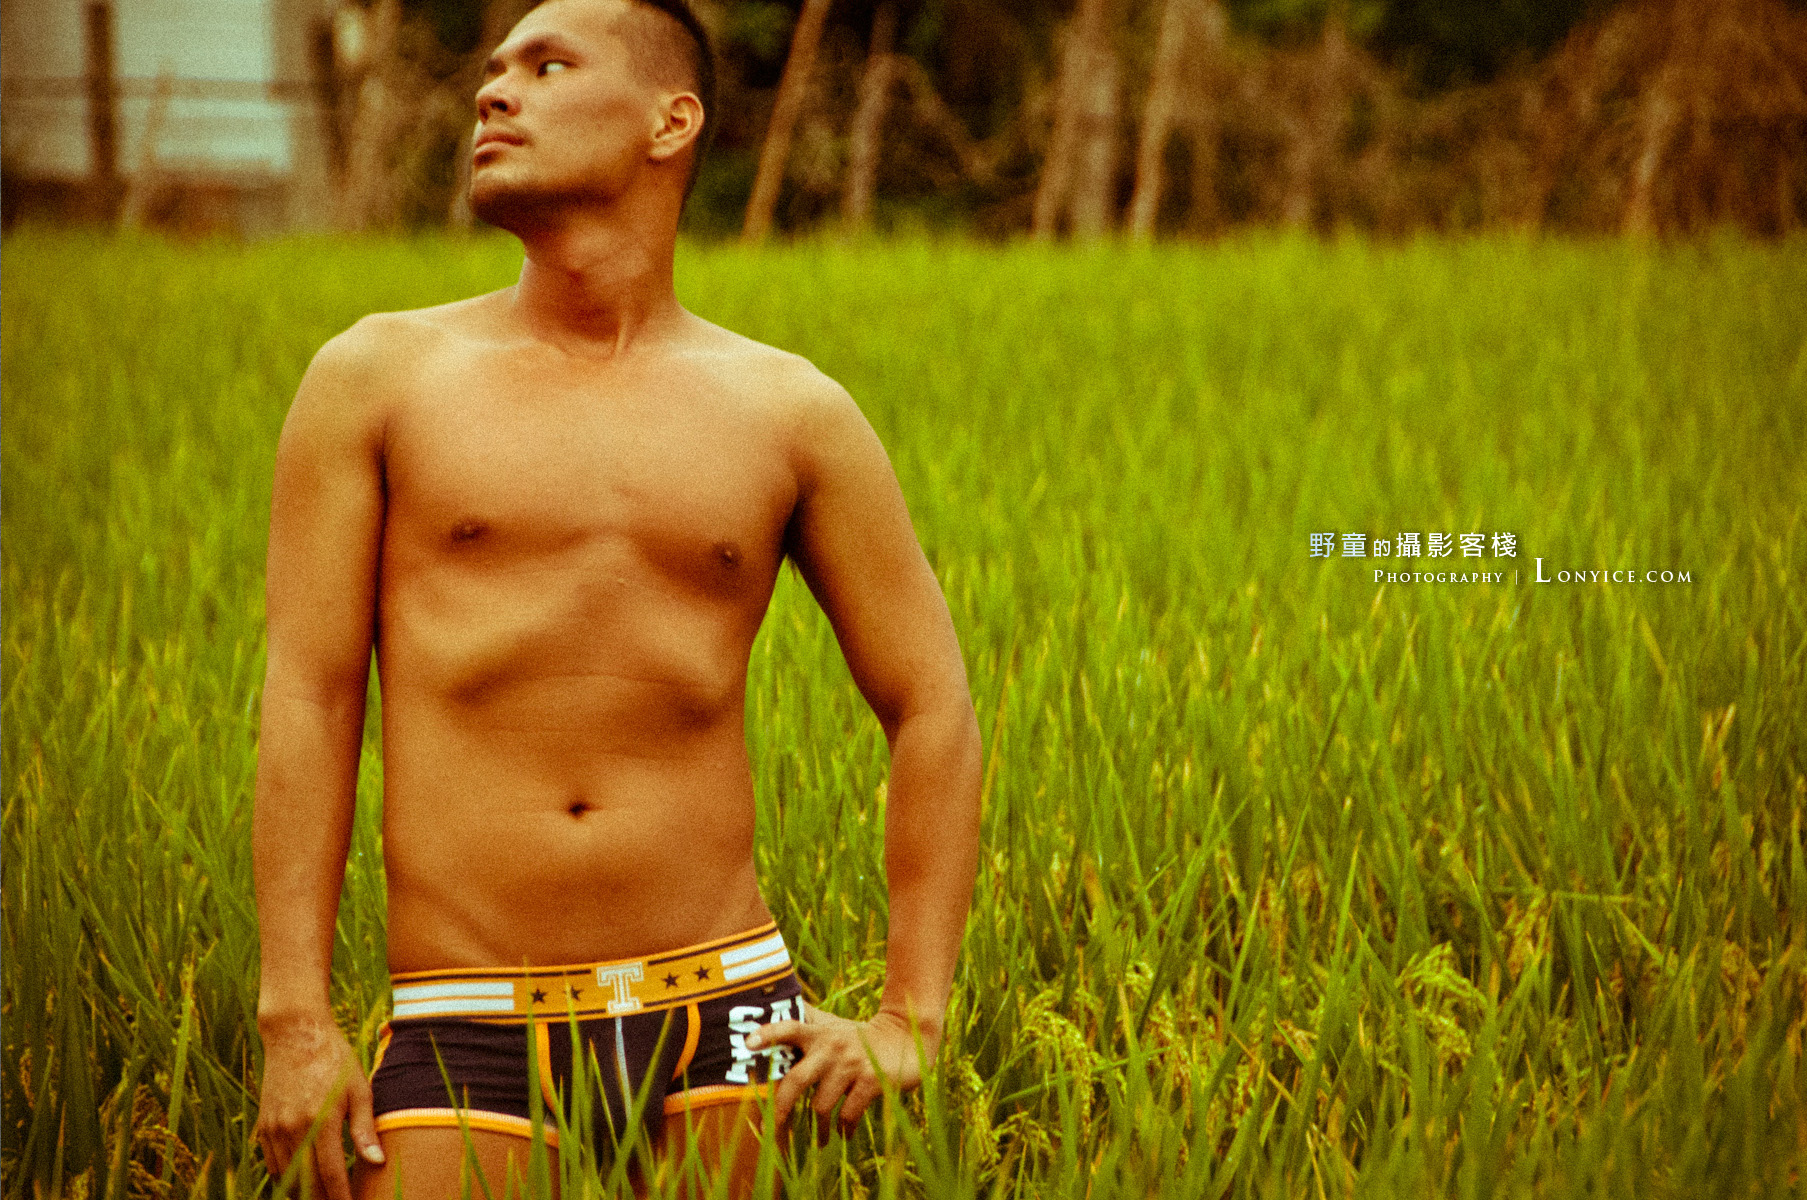 In the rice fields.